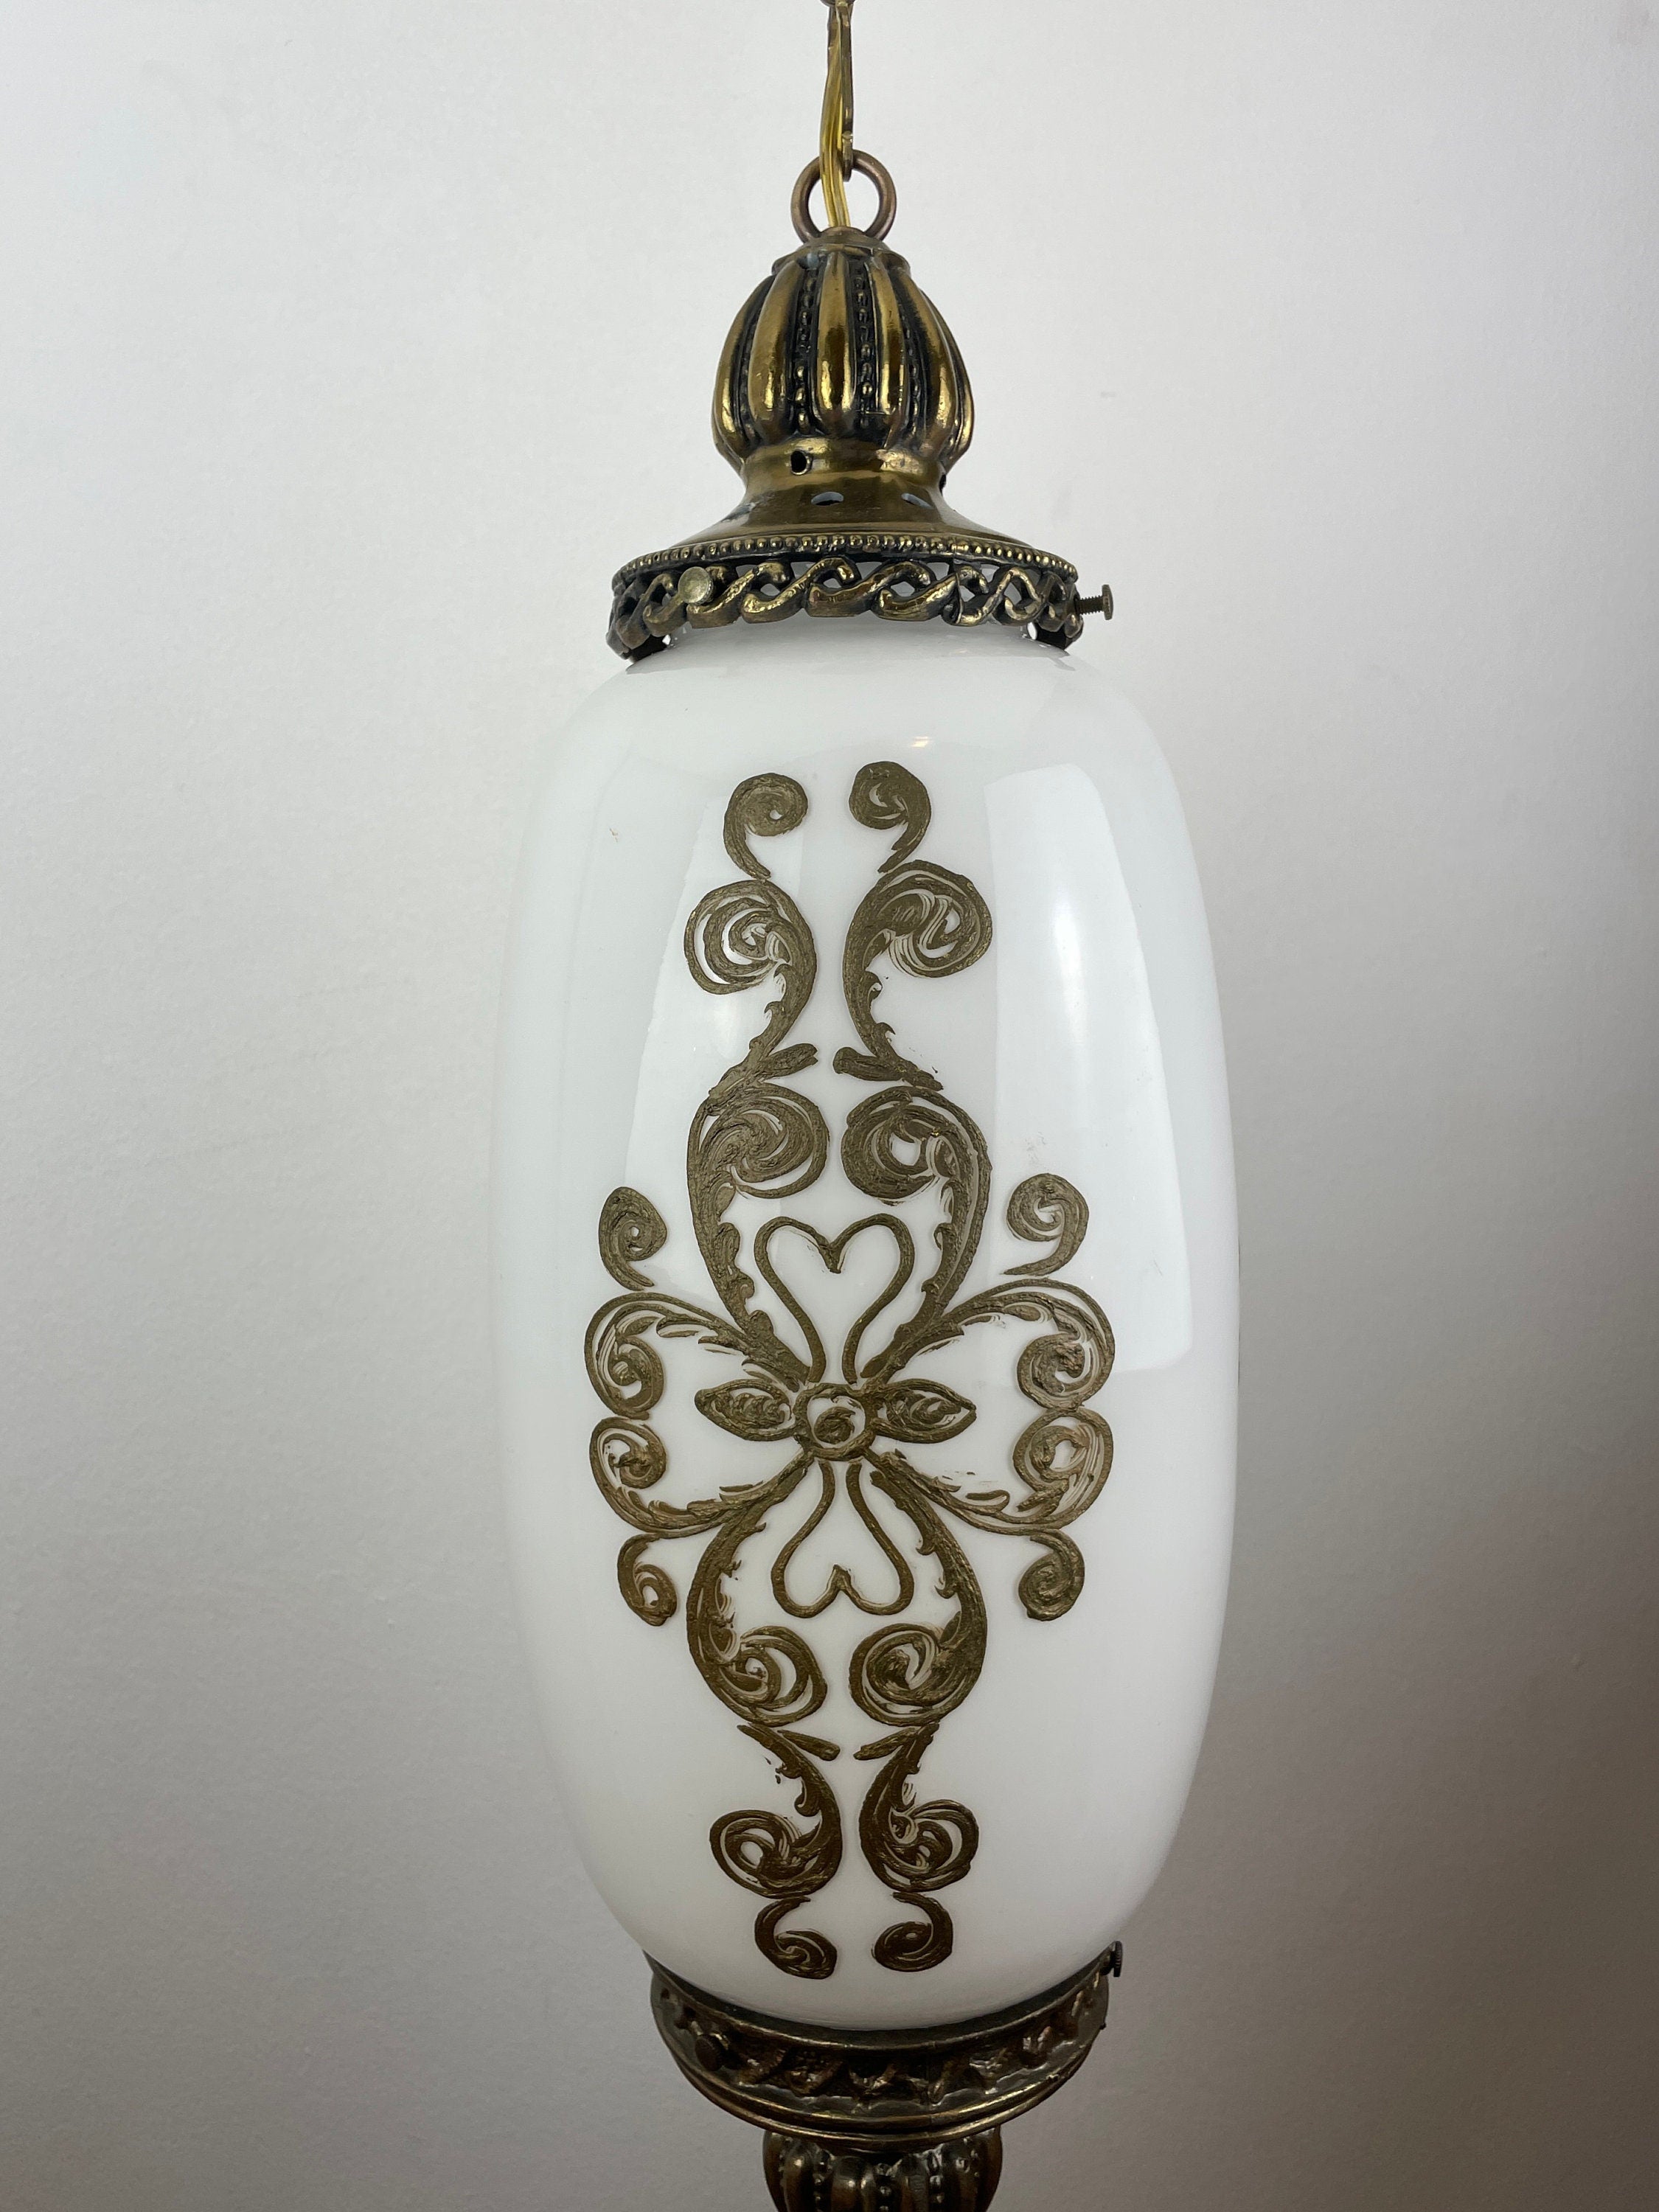 1960's Hollywood Regency Milk Glass Shade Embossed in Gold   - Retro Timeless Elegance with a Modern Twist